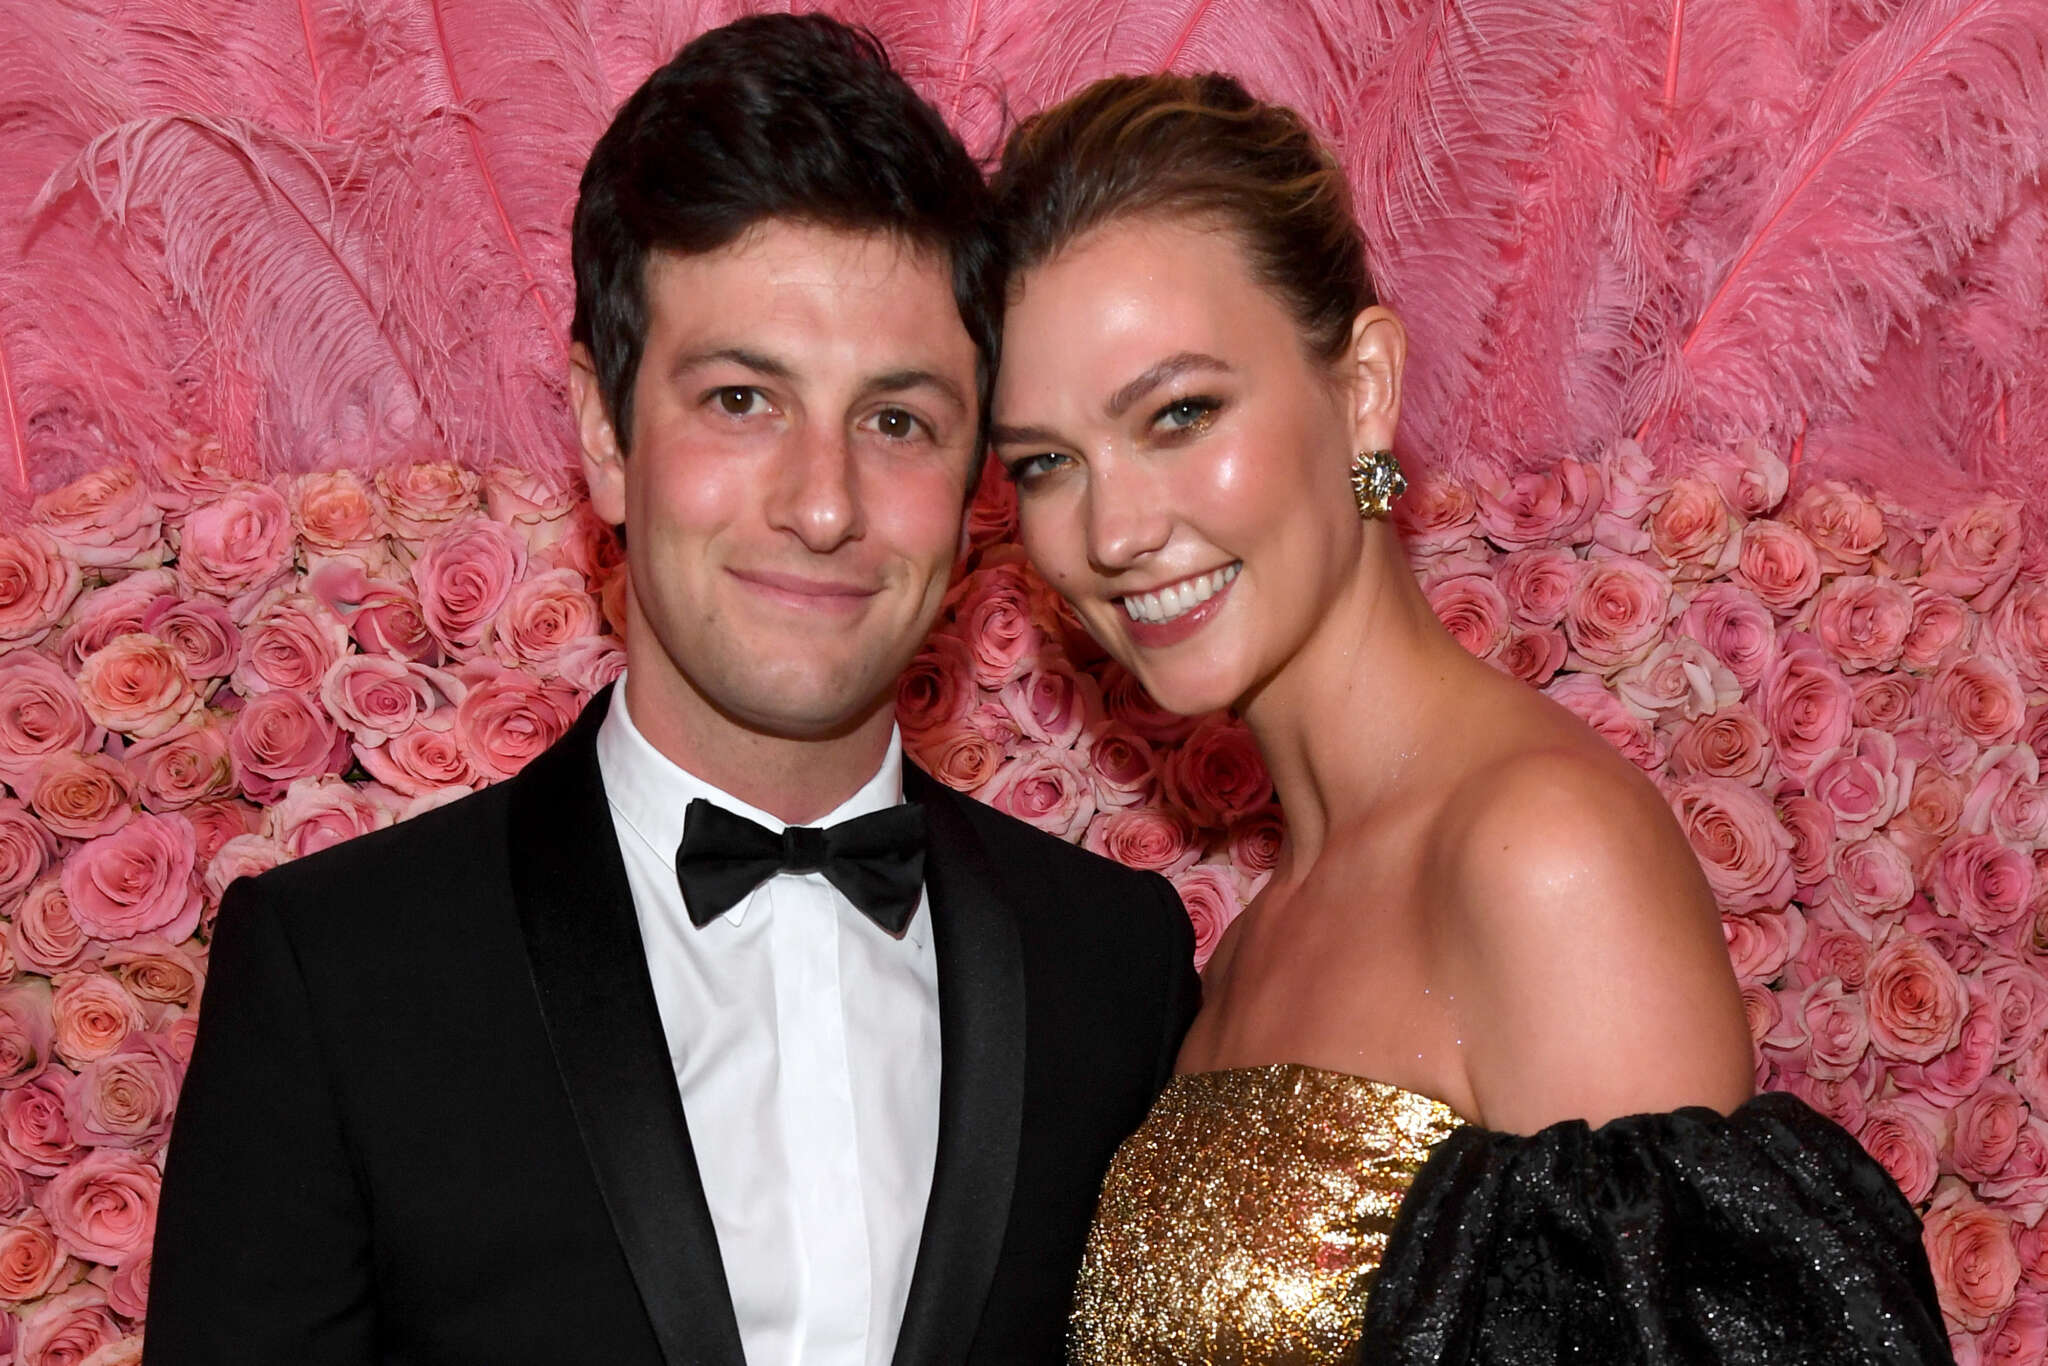 Karlie Kloss And Joshua Kushner Welcome Their First Baby – See The First Pic!